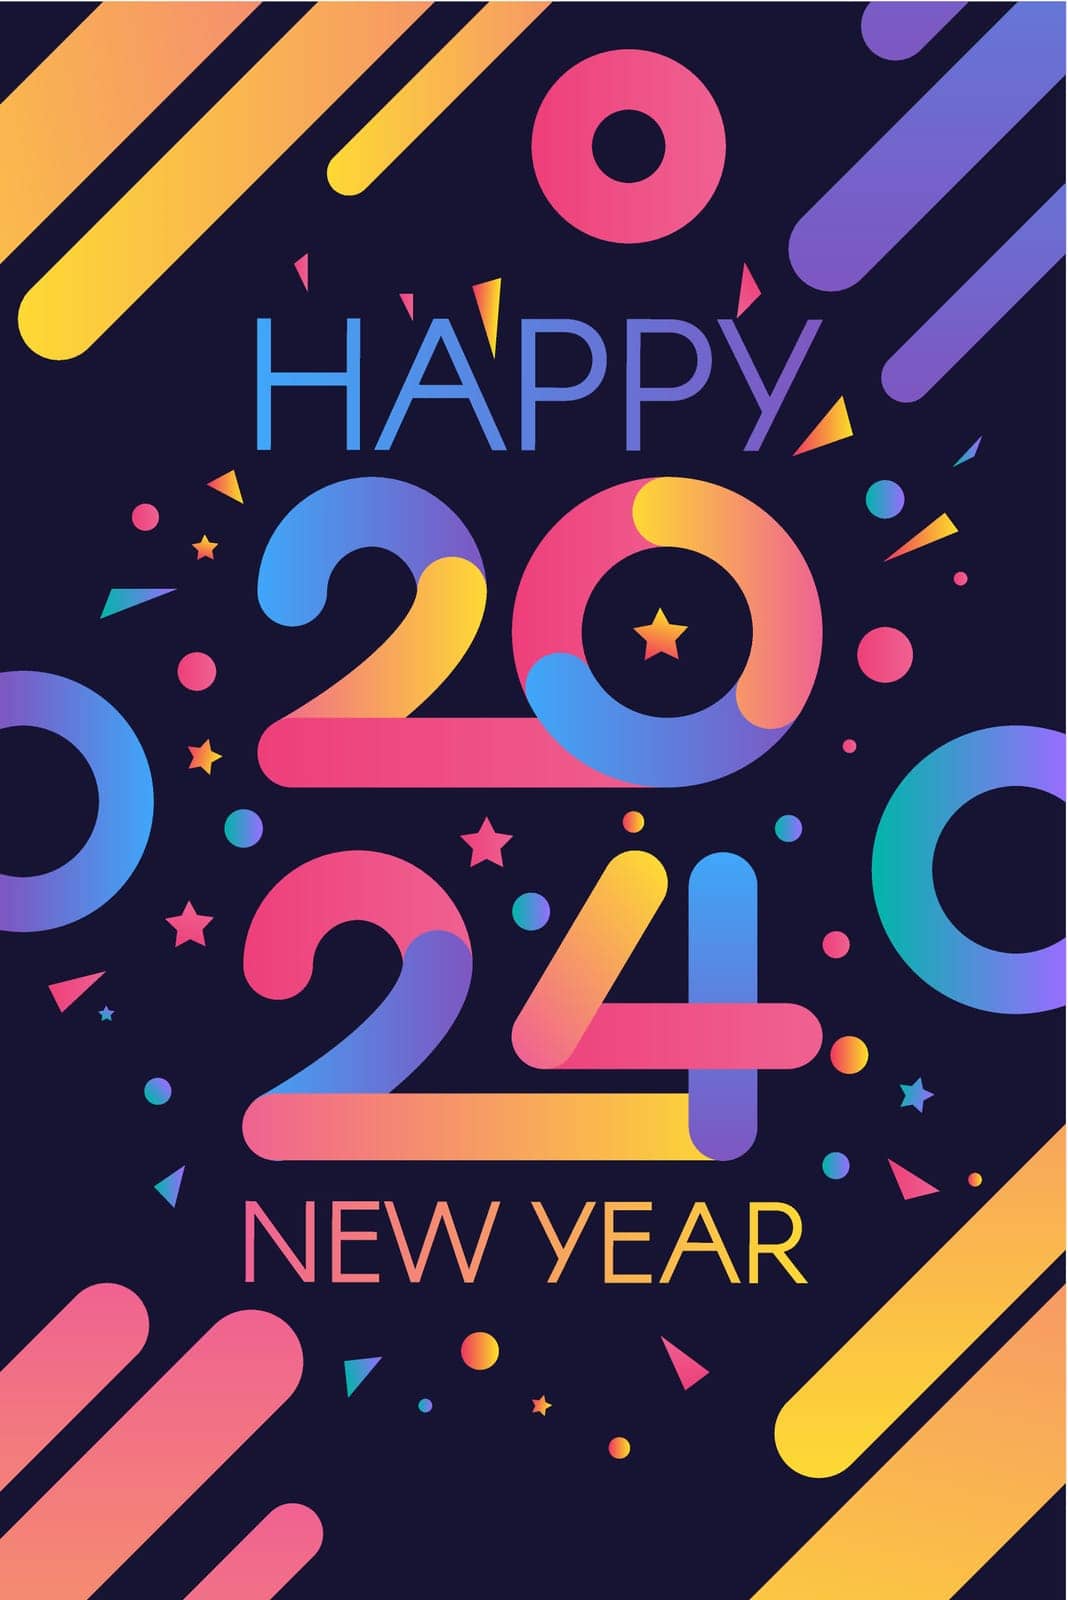 Modern Happy New 2024 Year Holiday poster in night blue sky colors with date 2024 and holiday attributes. Template for printing, announcement poster for inviting guests to celebration. Vector